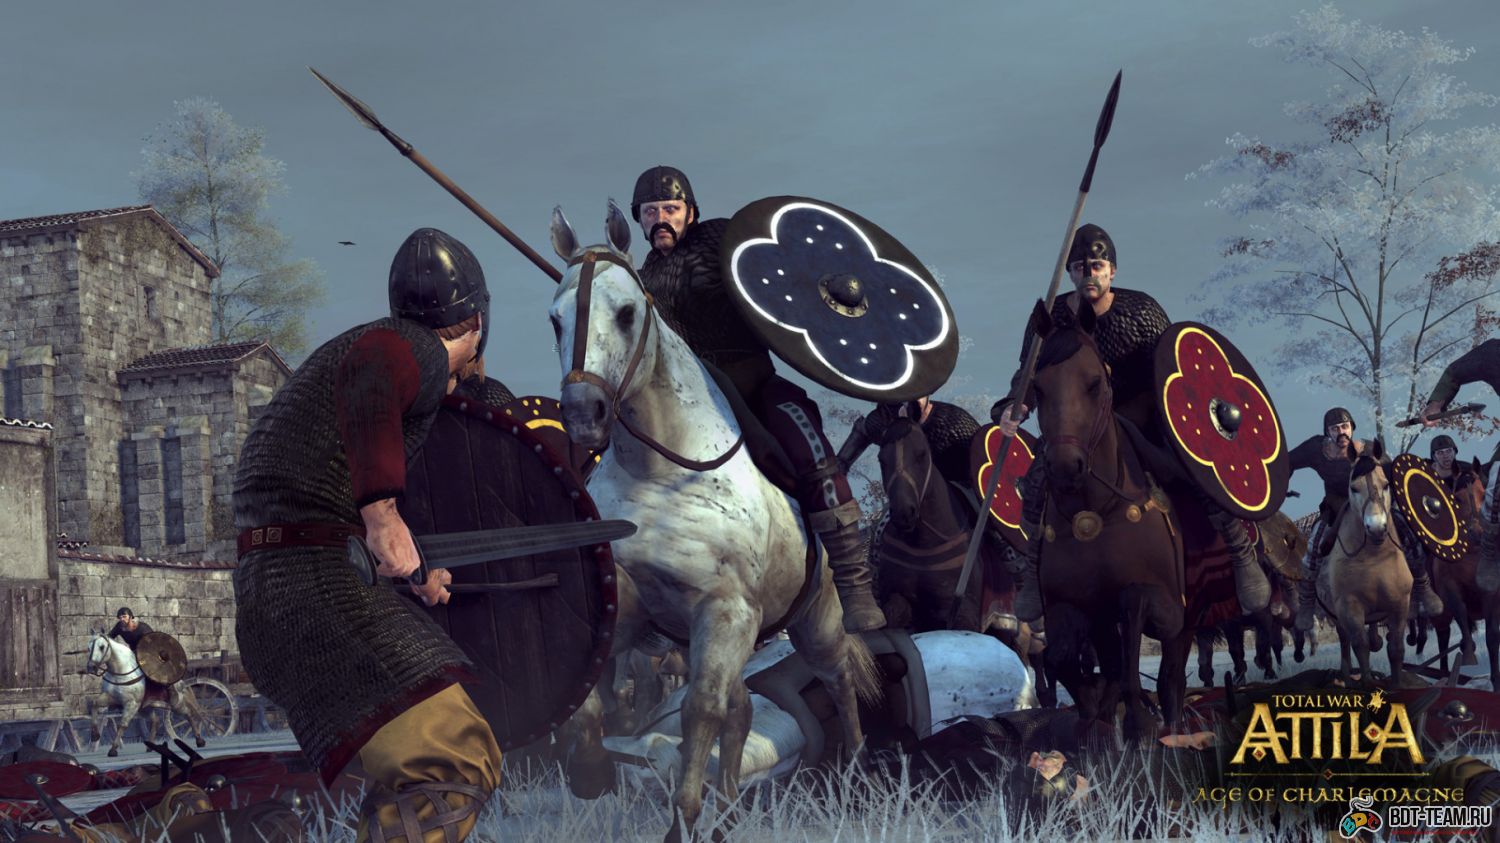  Total War: ATTILA - Age of Charlemagne Campaign Pack 